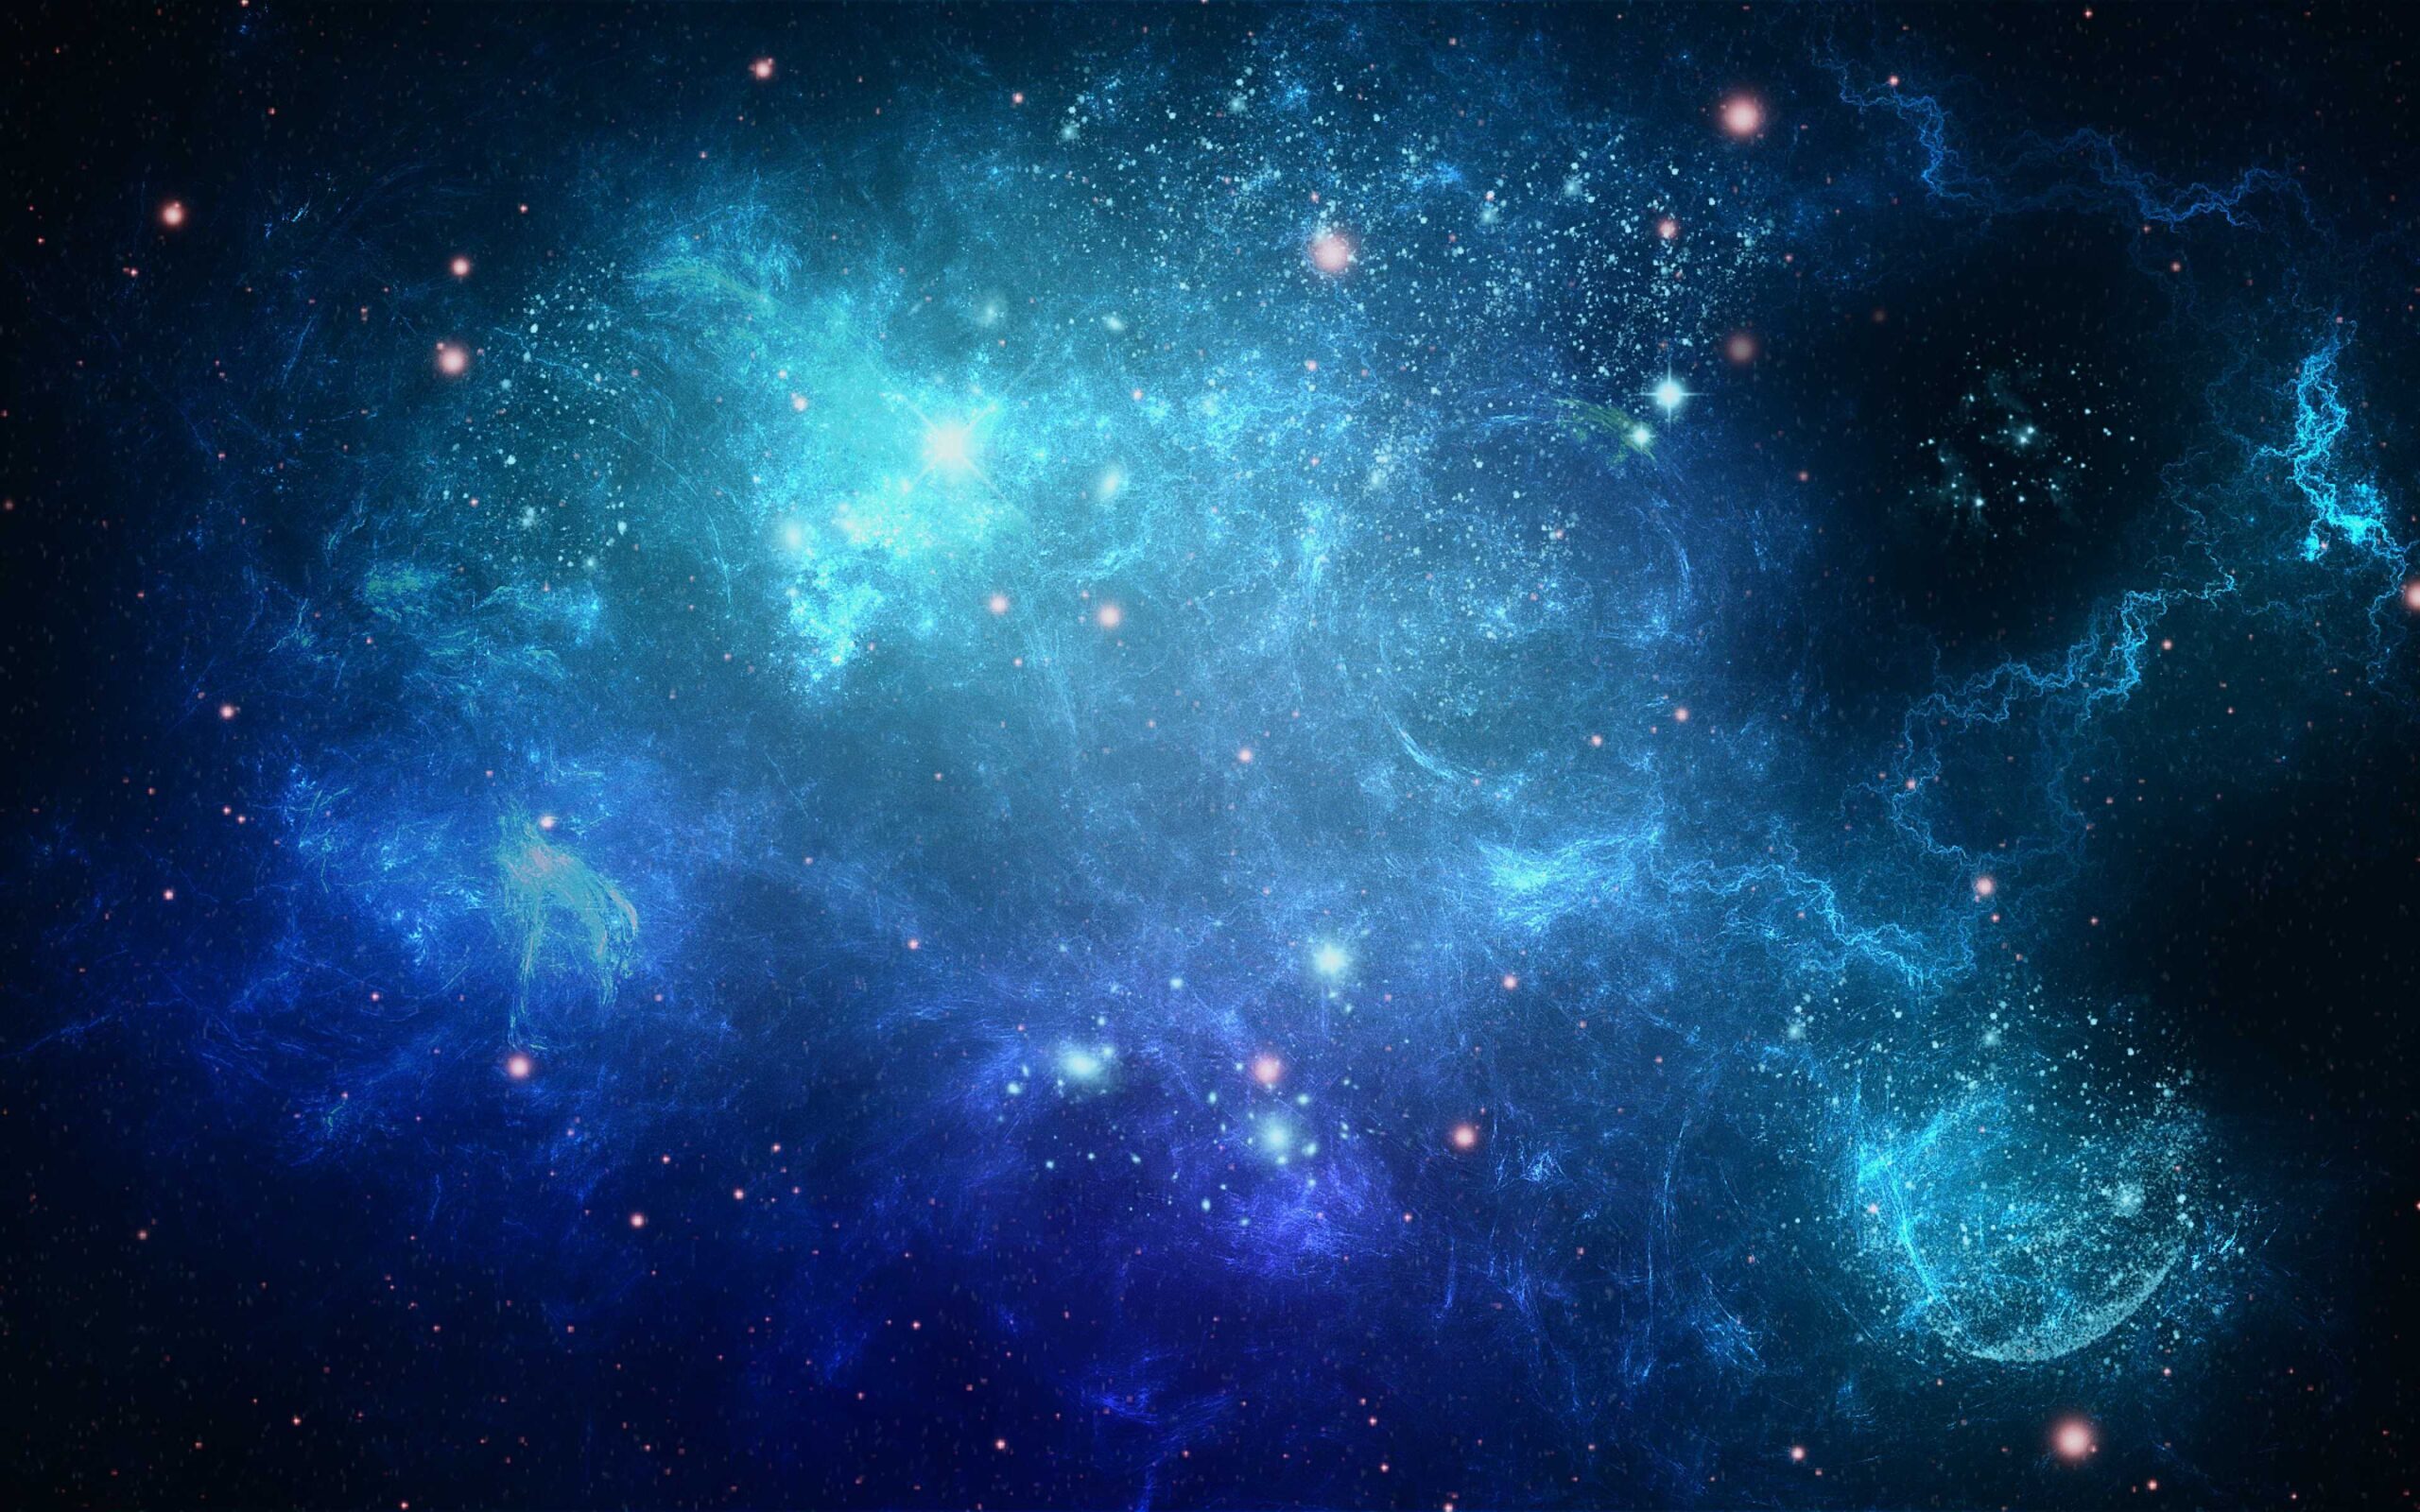 Hd Backgrounds Space Star Cluster Galaxy Blue Violet Gas Desk 4K For